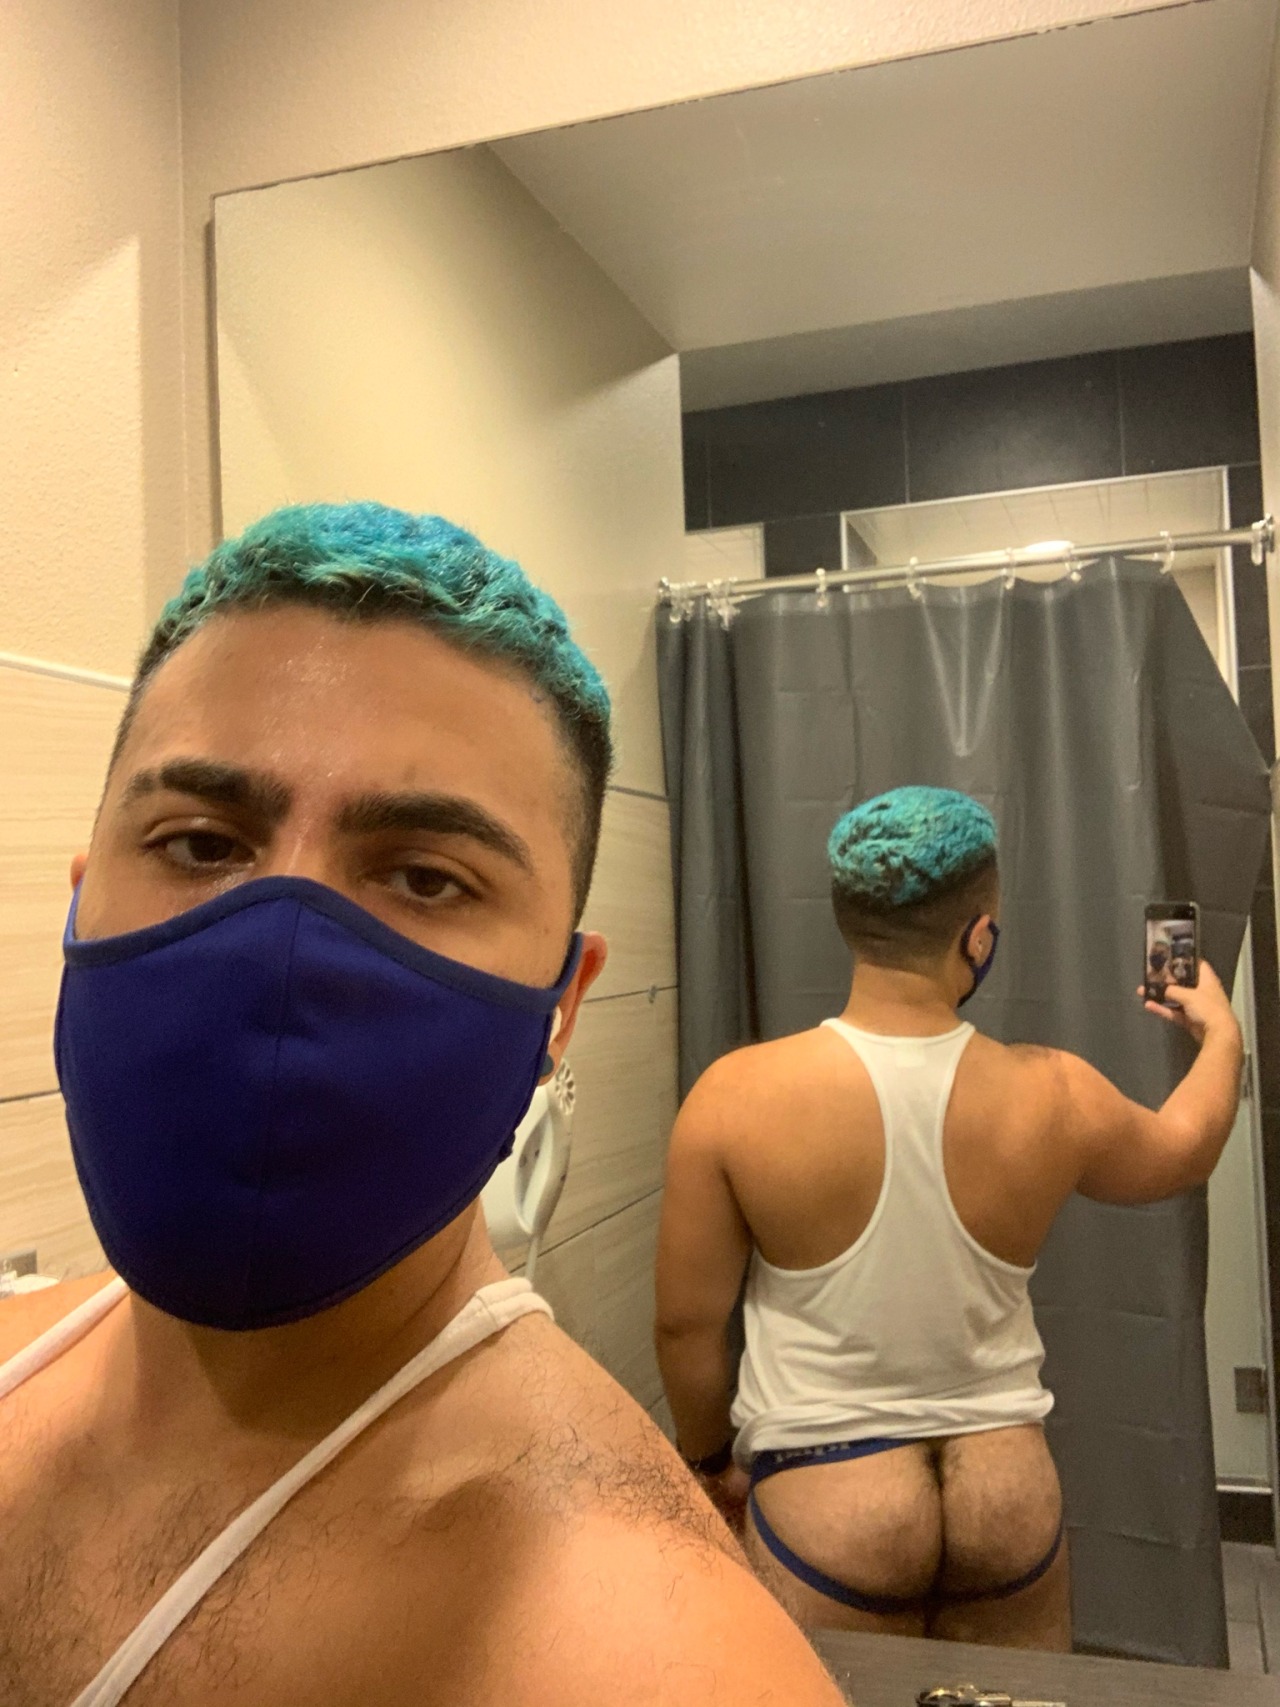 tamale-papi:First time working out in a jock 